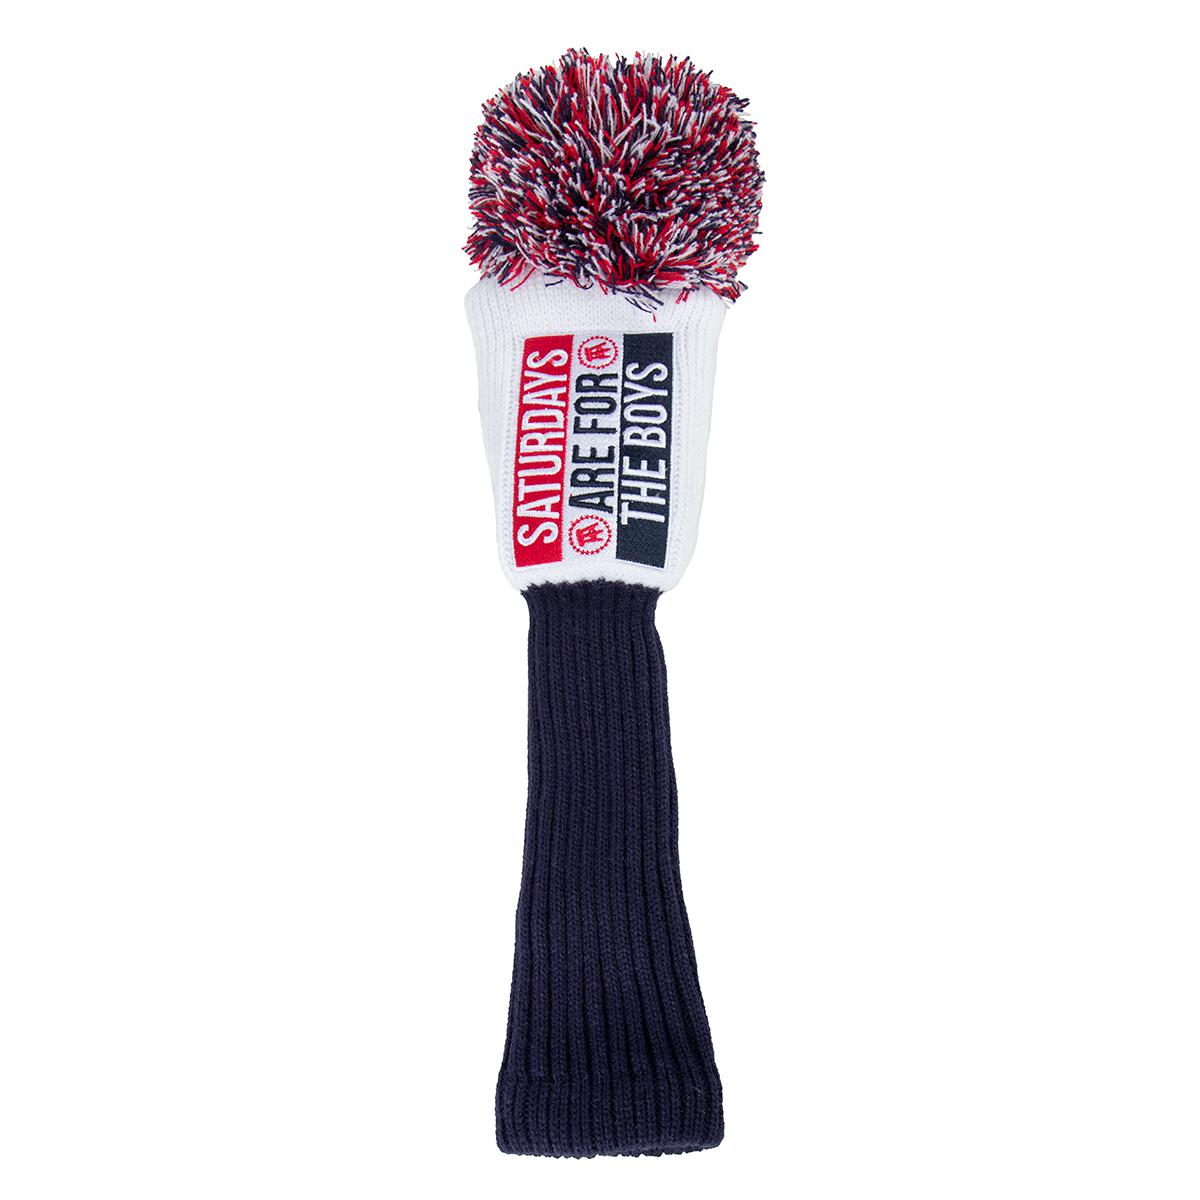 SAFTB Driver Knit Cover-Golf Accessories-Fore Play-Navy-One Size-Barstool Sports